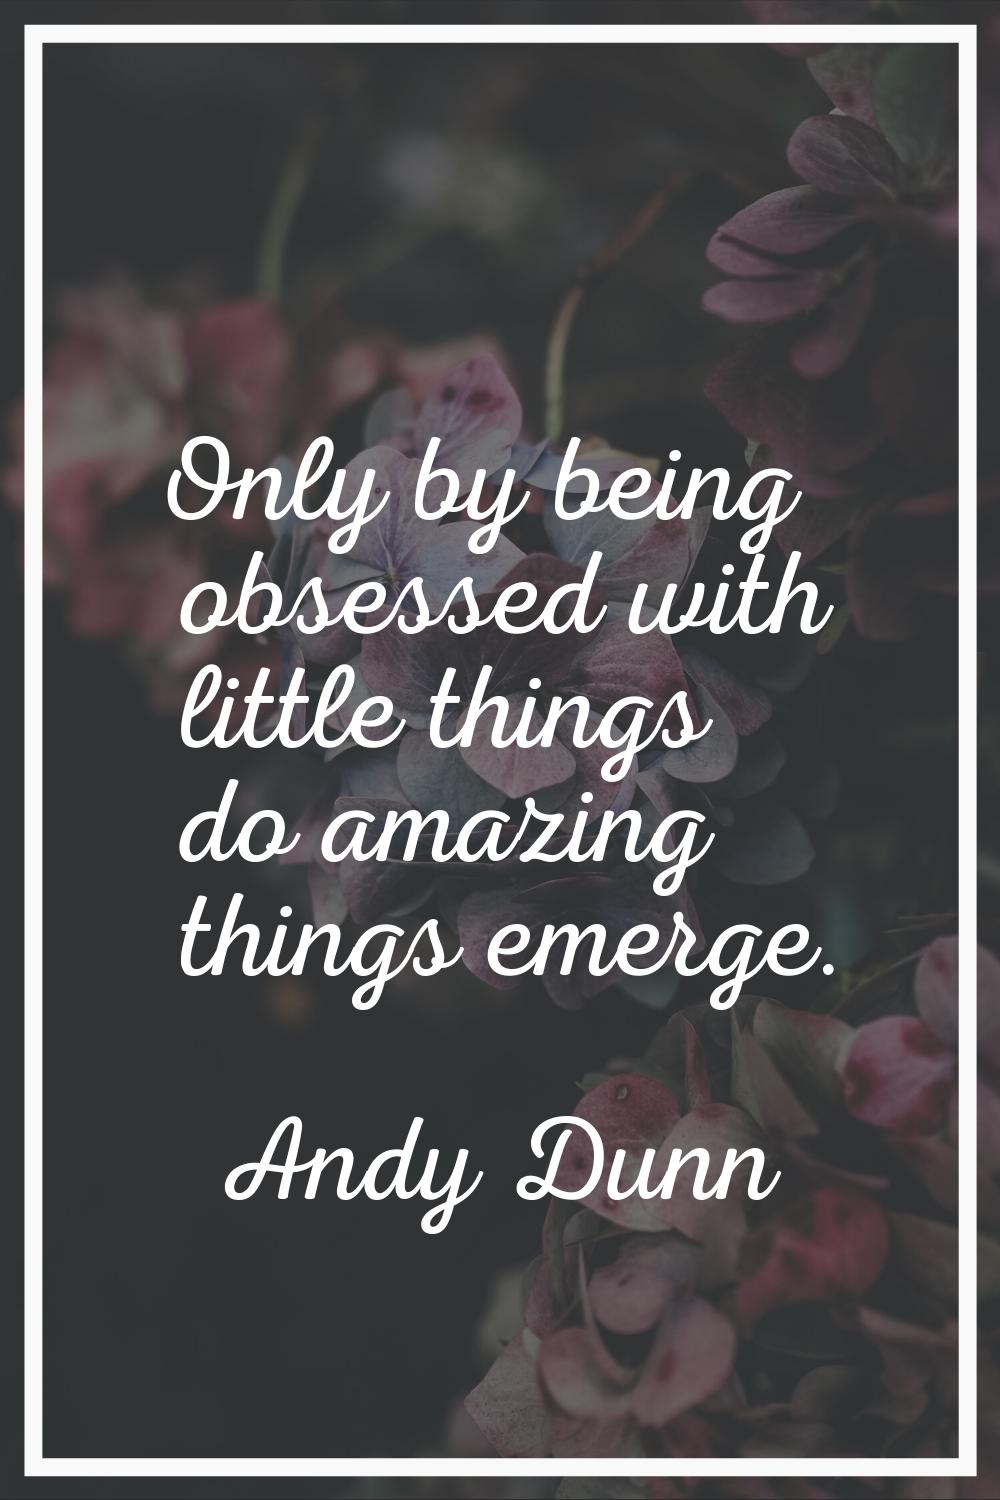 Only by being obsessed with little things do amazing things emerge.